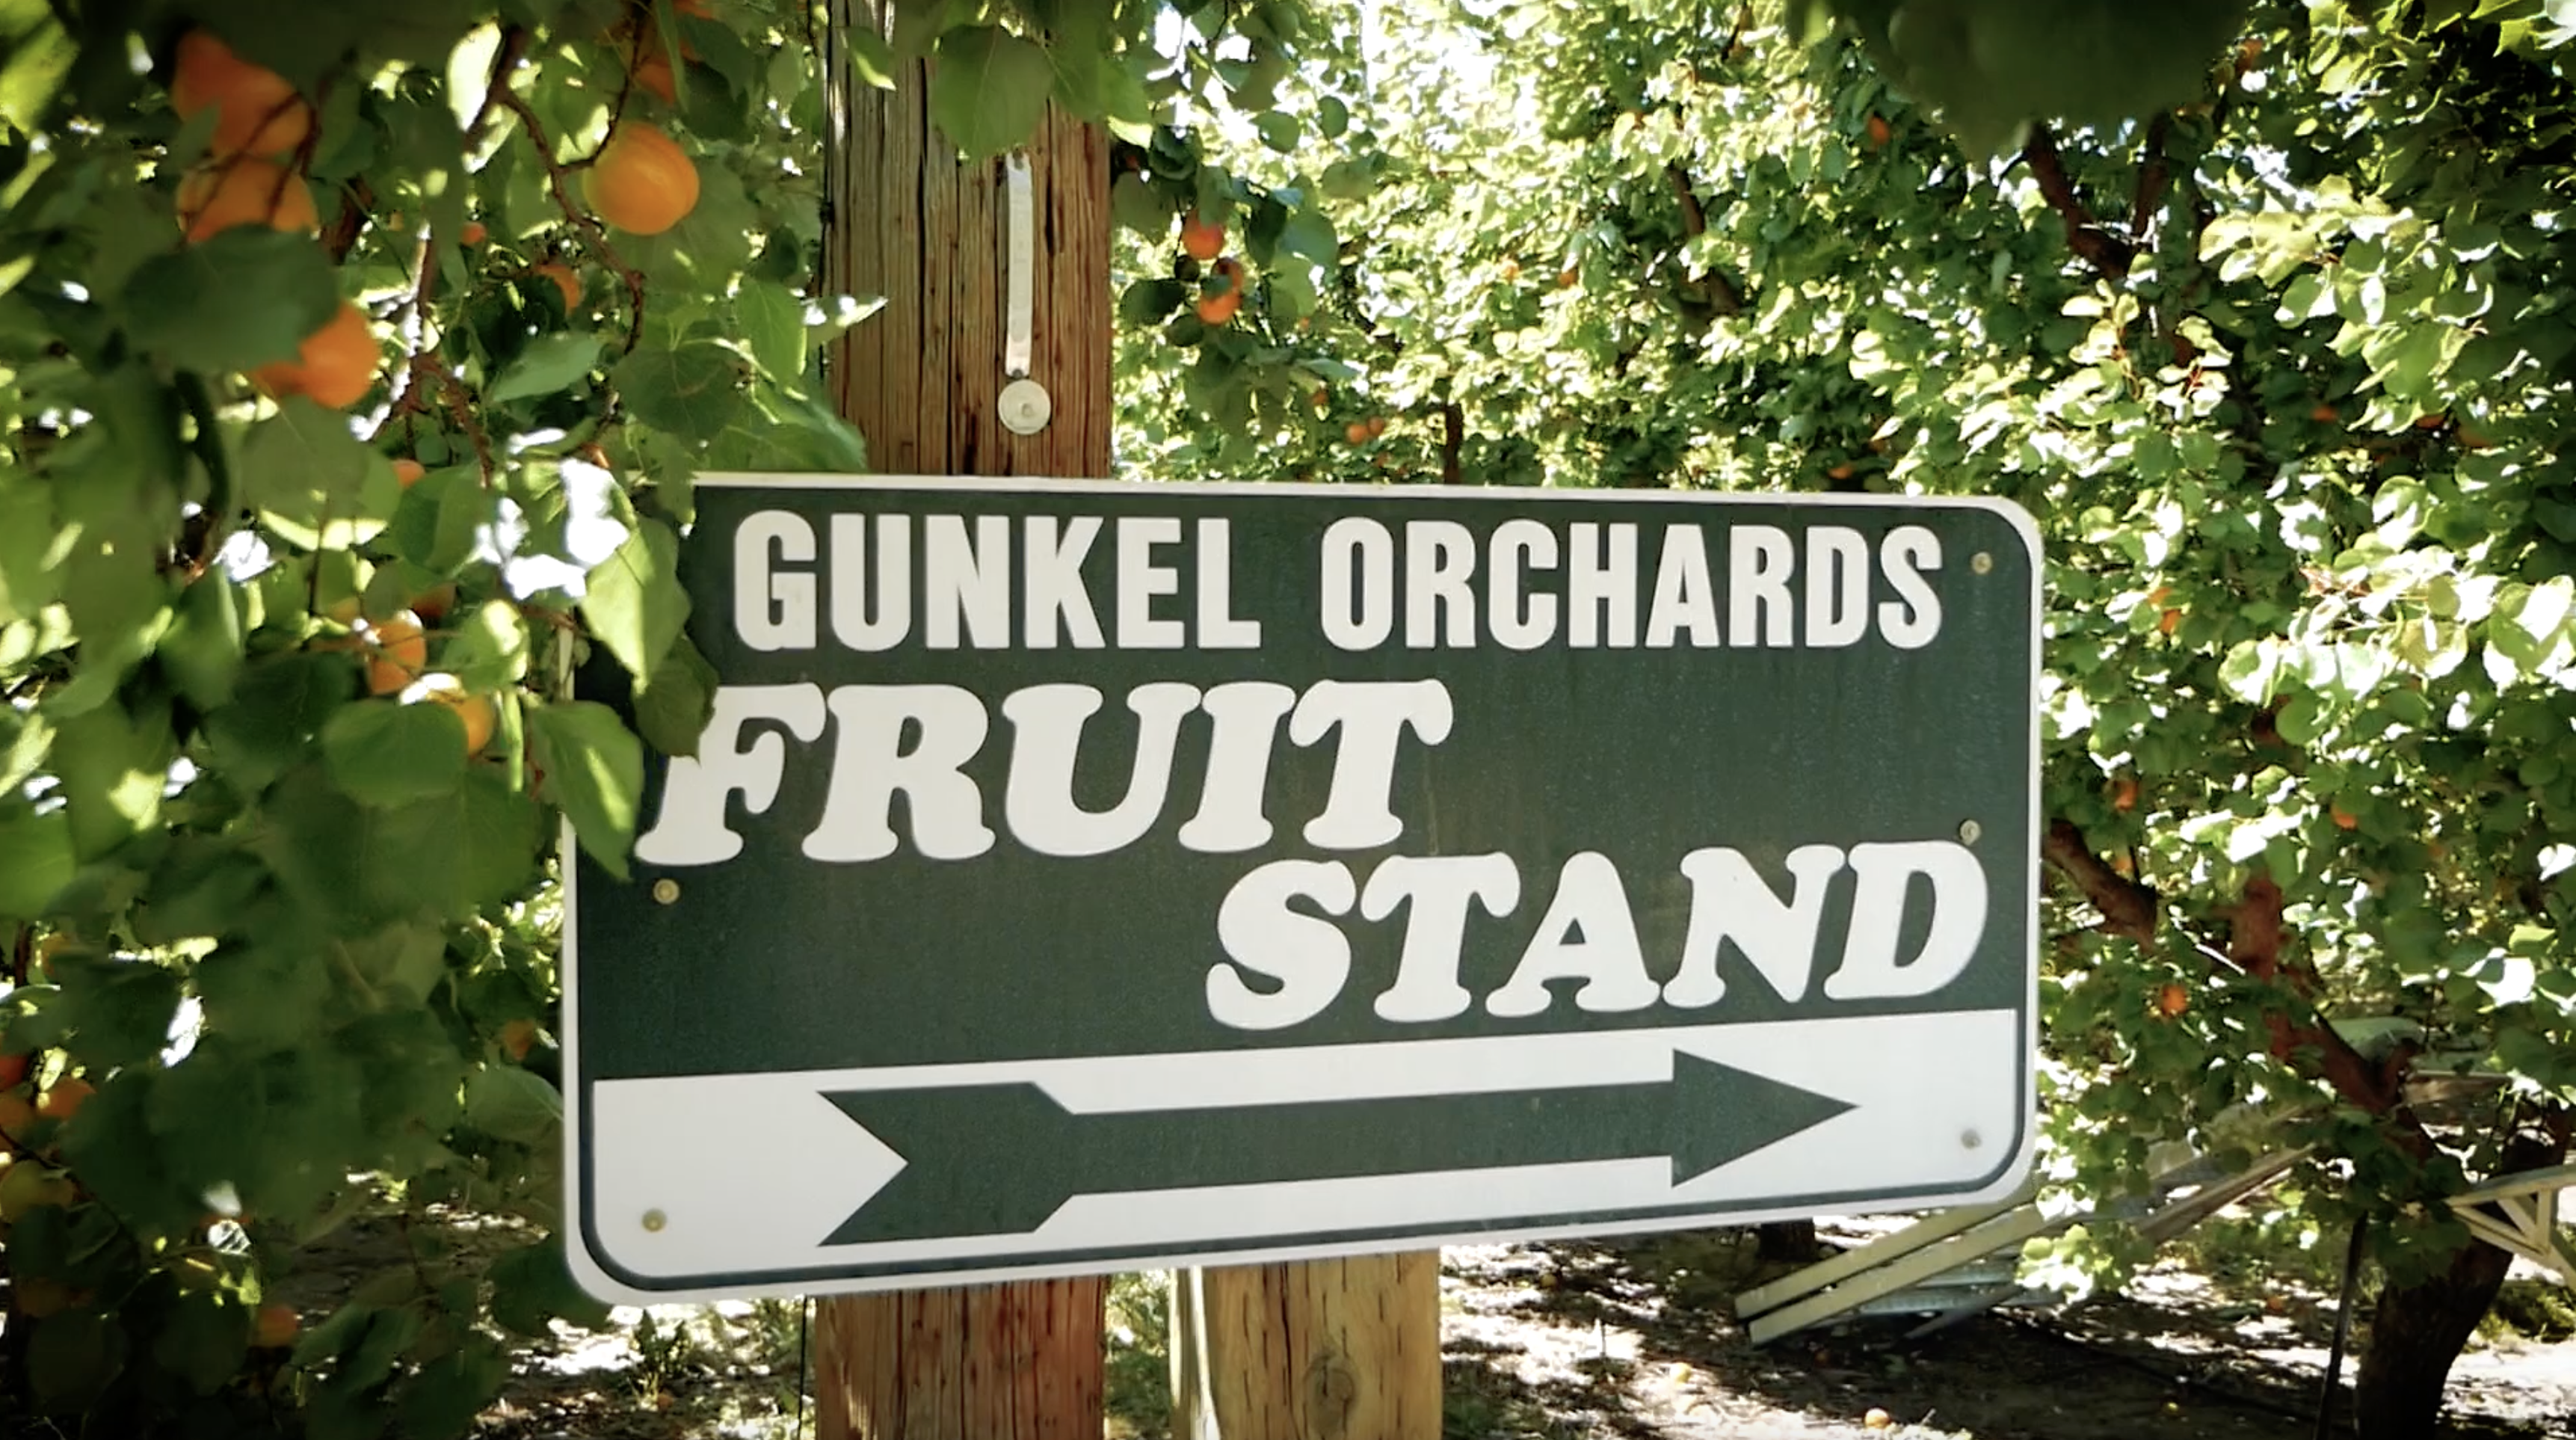 Gukel Orchards fruit stand sign amongst peach trees 